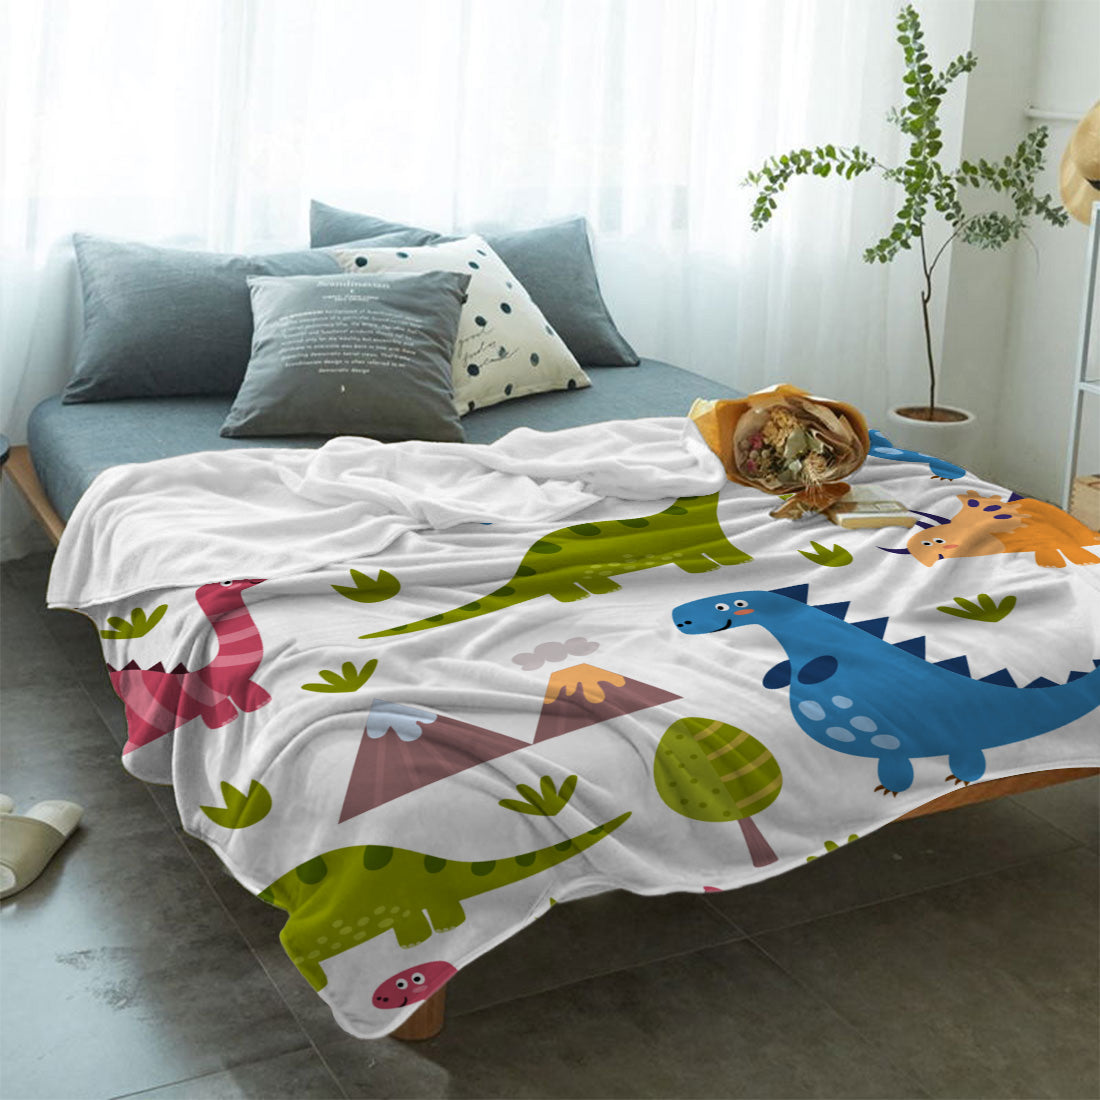 🦖 Dino-Mite Snuggle Buddy: Super Soft Fleece Baby Blanket for Your Inner Baby 🦖